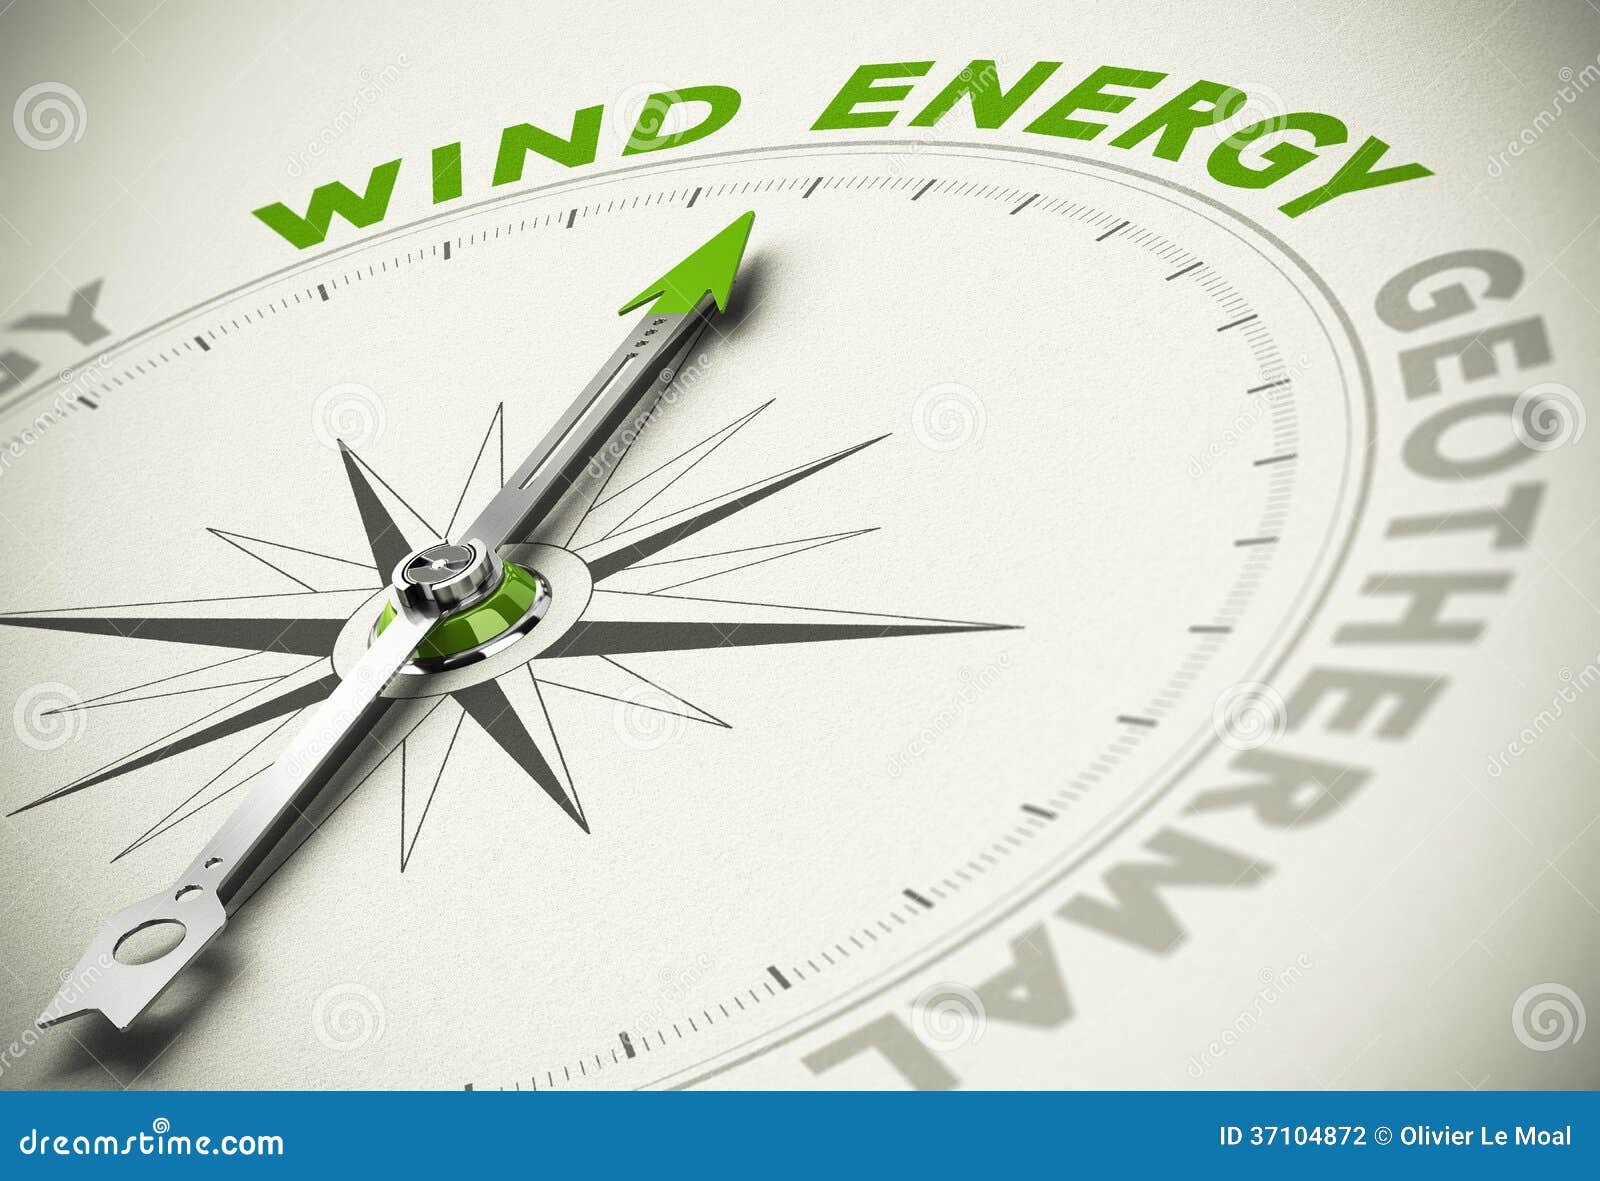 green energies choice - wind energy concept